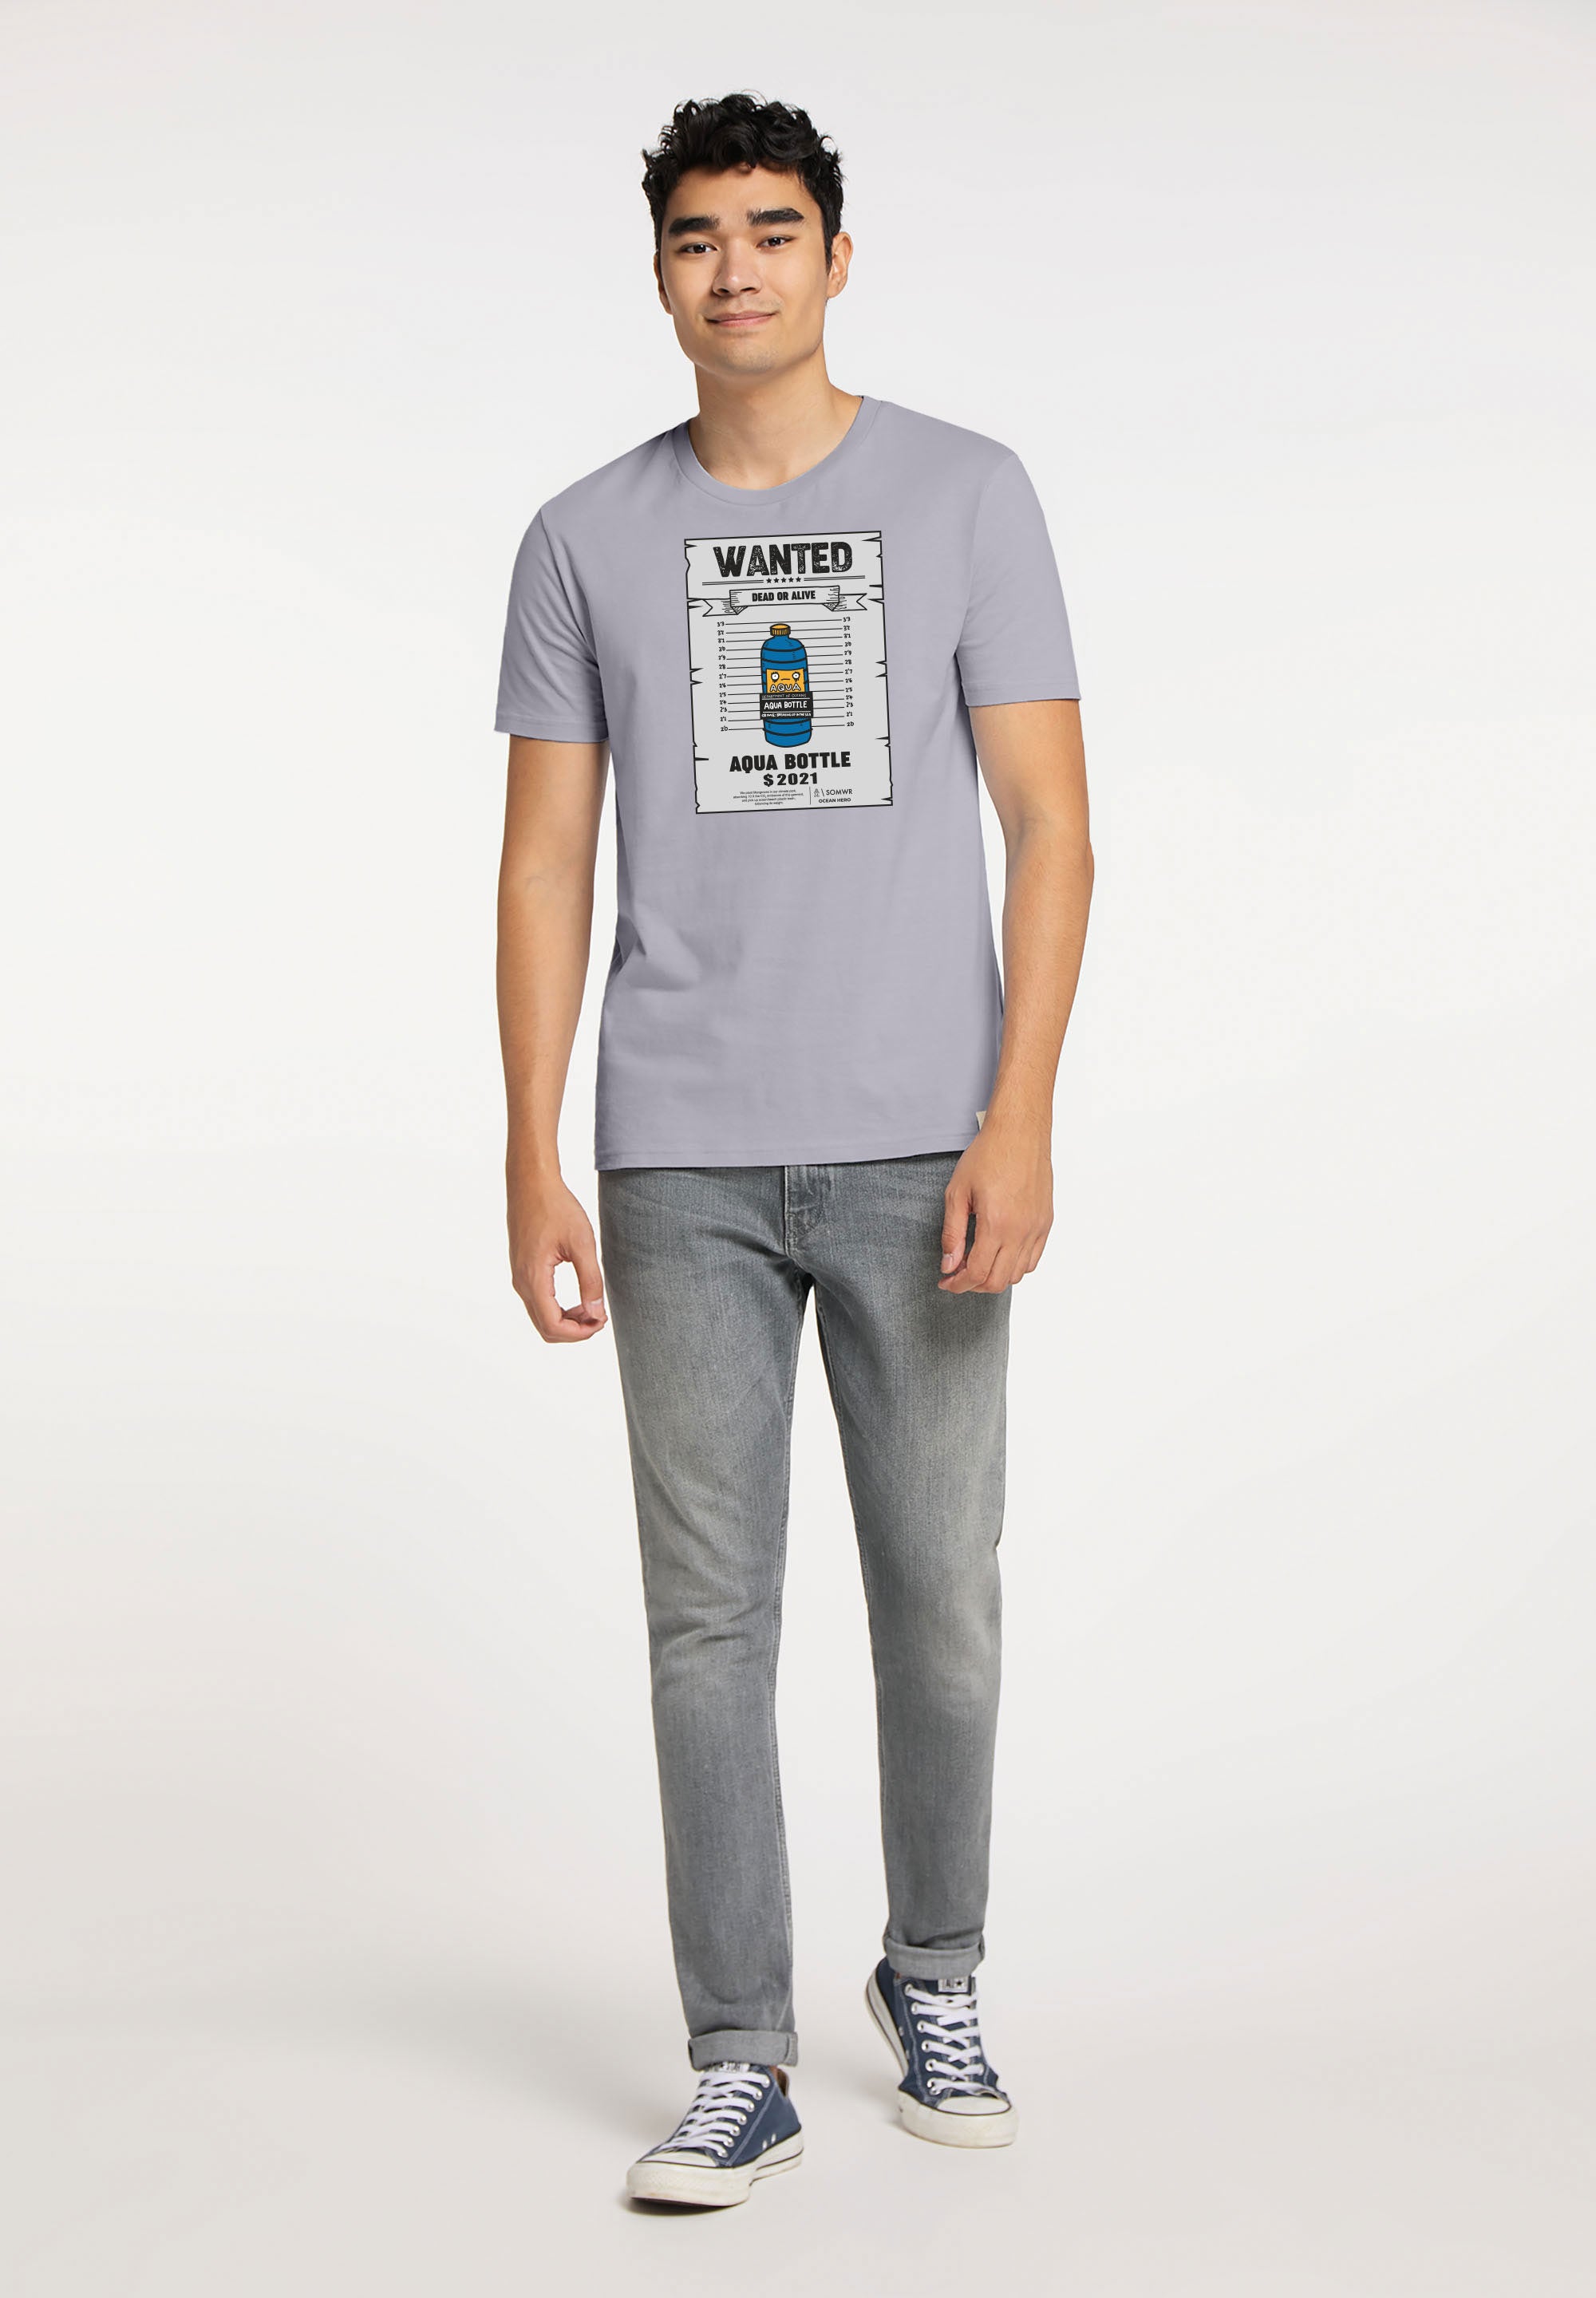 SOMWR IMPRESSION TEE T-Shirt GRY070